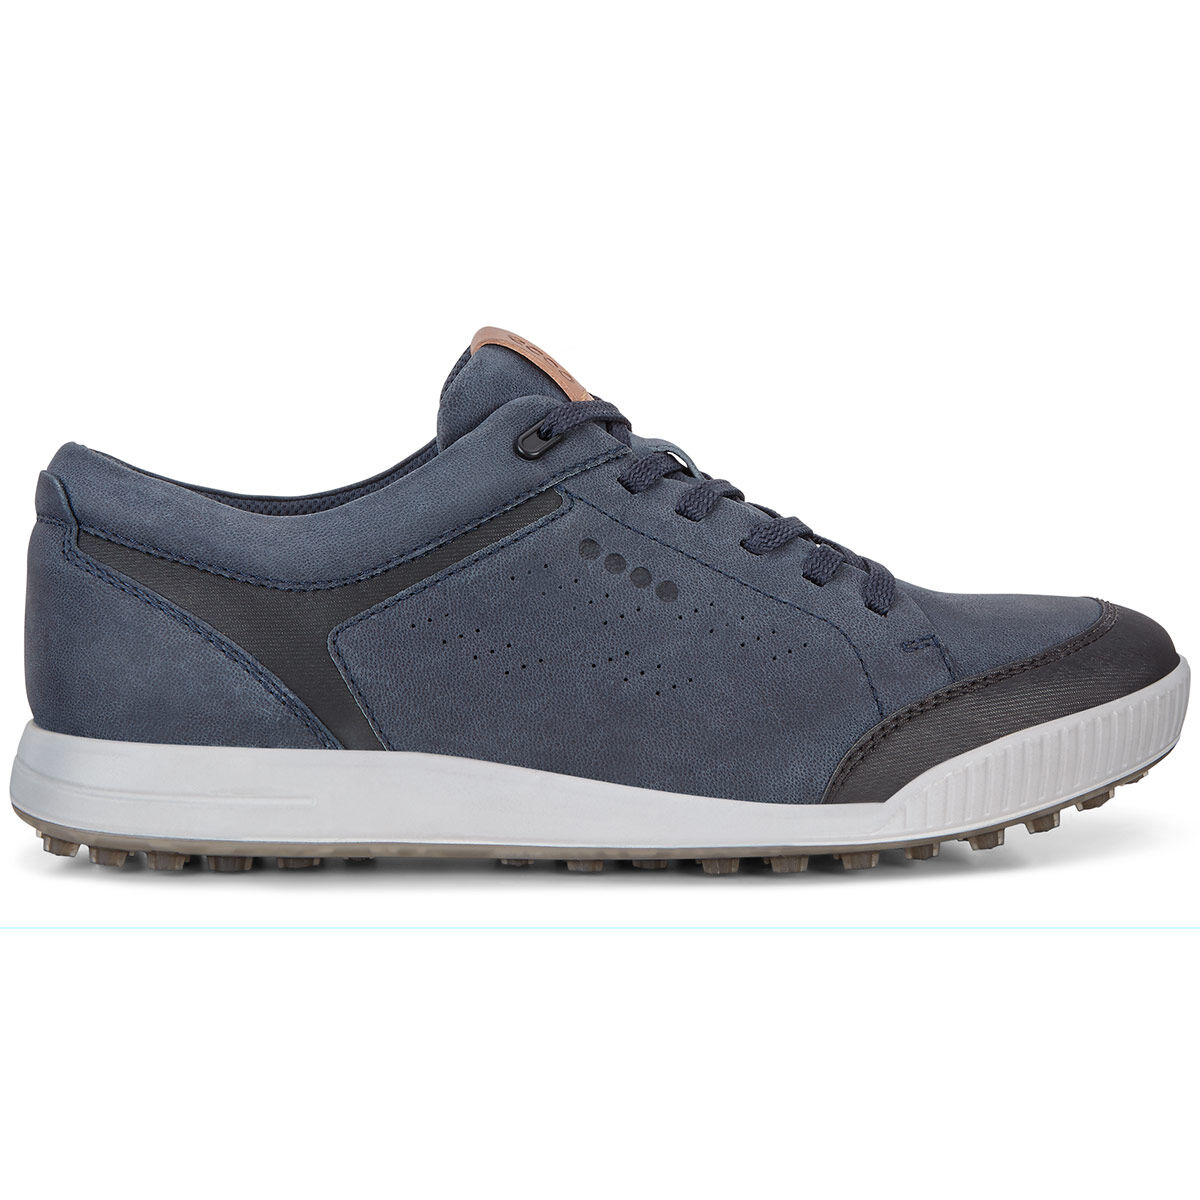 ECCO Golf Street Retro Shoes from 